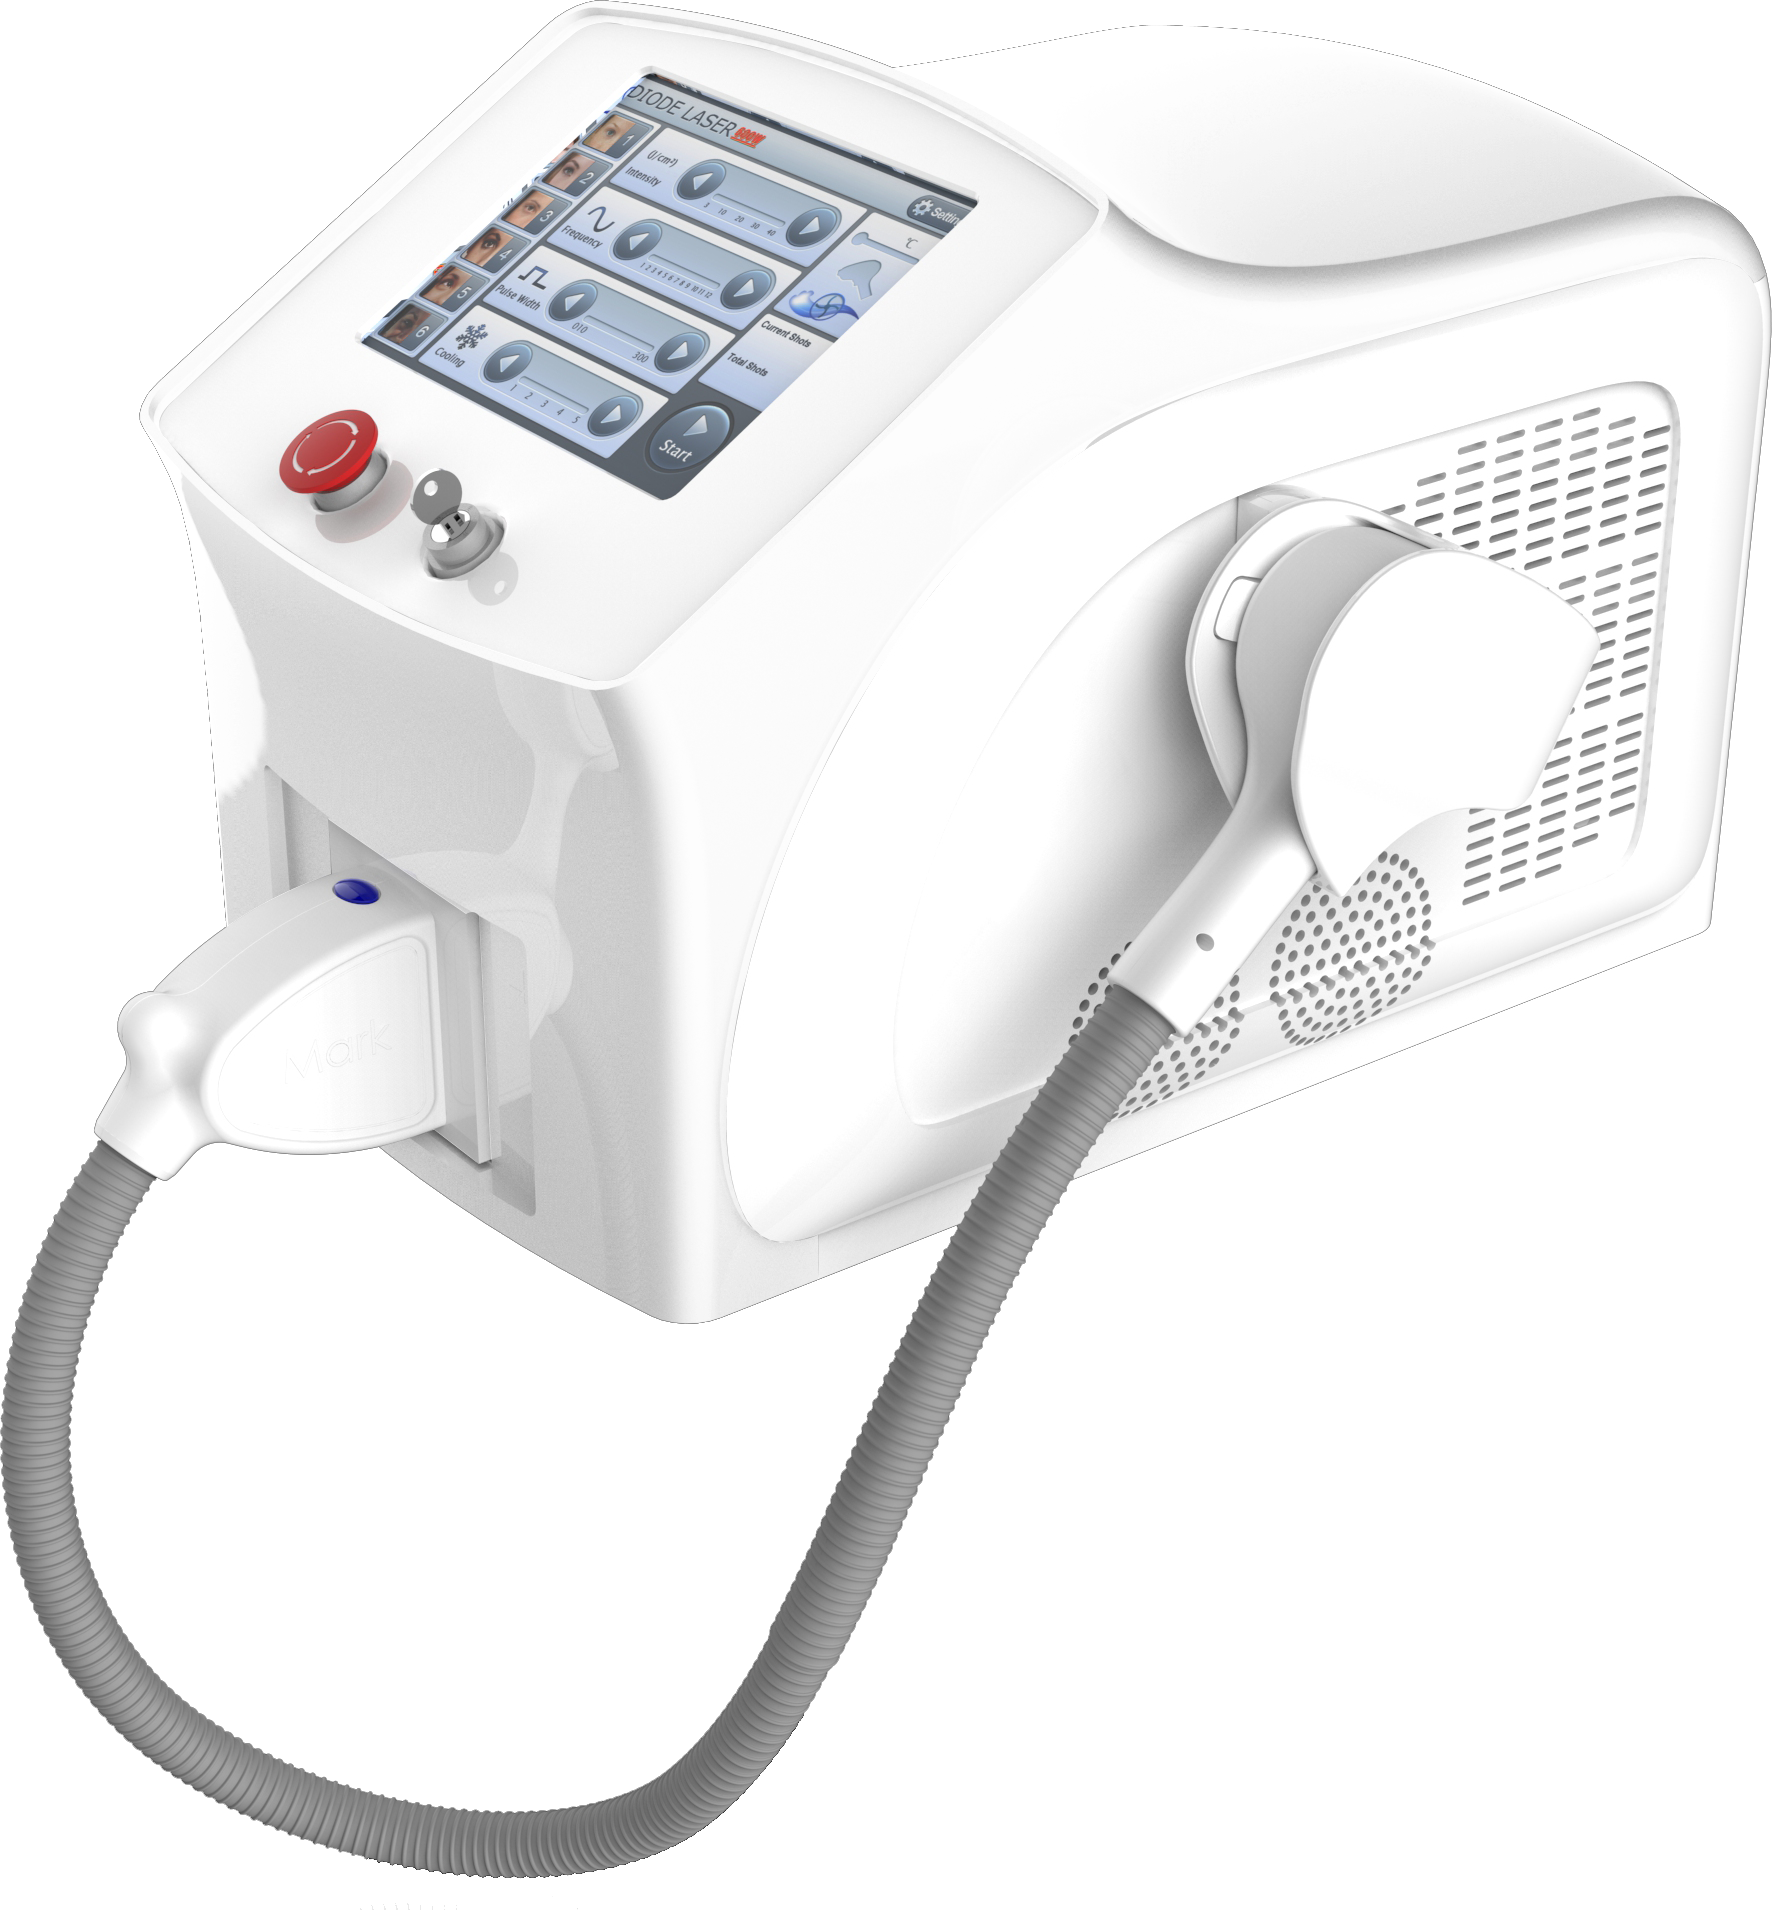 MDD CE MDR CE Medical CE approval Germany Micro channel Portable808nm diode laser hair removal laser machines